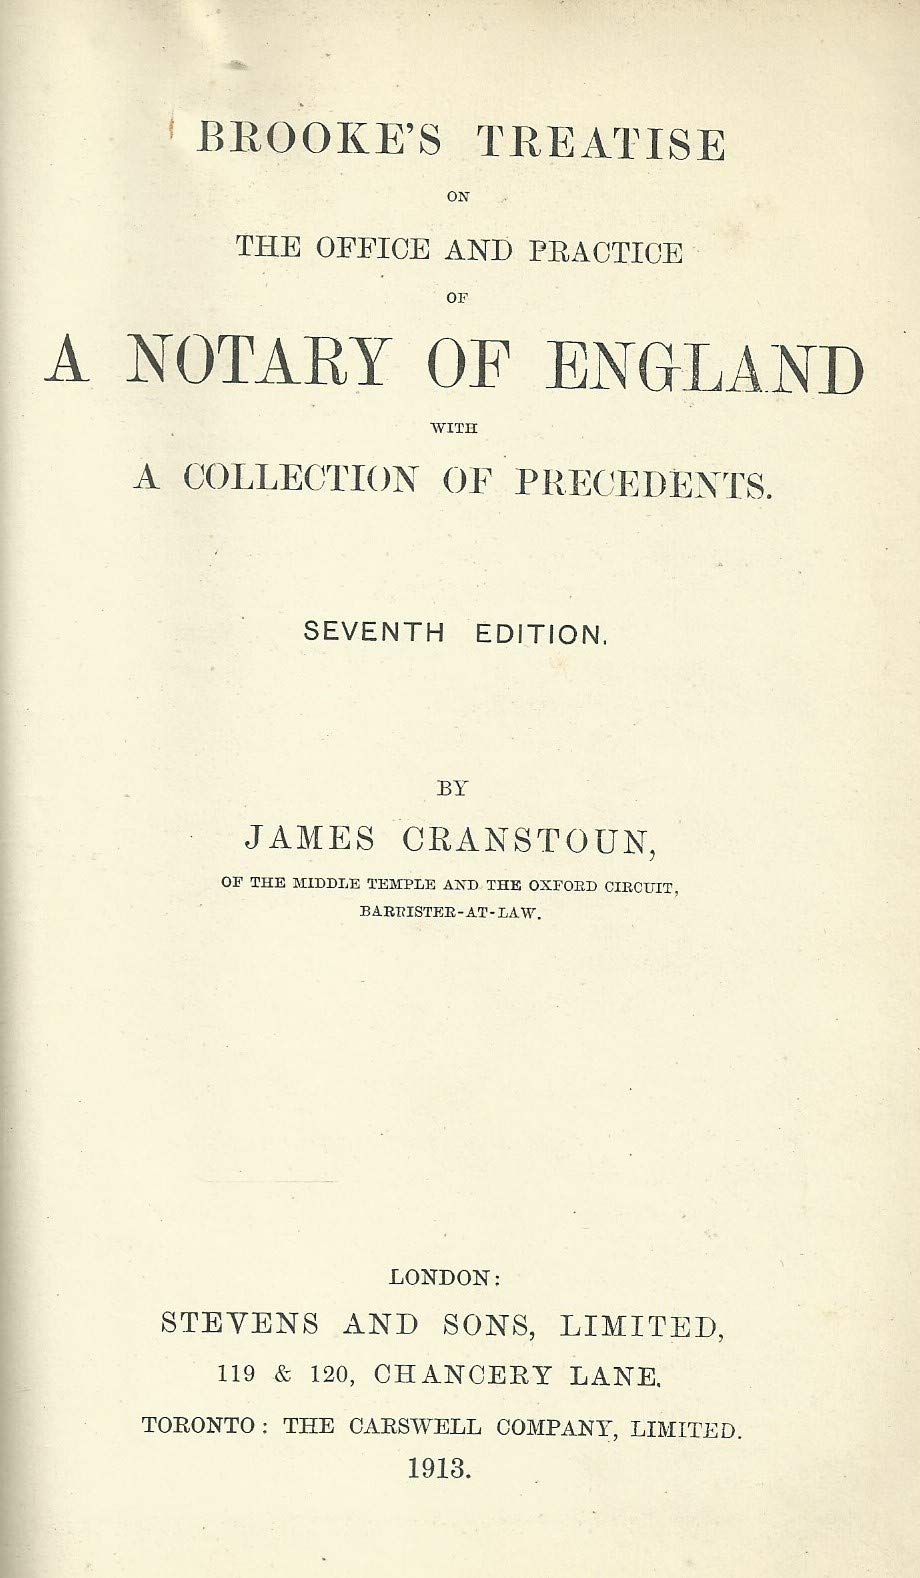 Brooke's Notary - Brooke's Treatise on the Office and Practice of A Notary of England with a Collection of Precedents